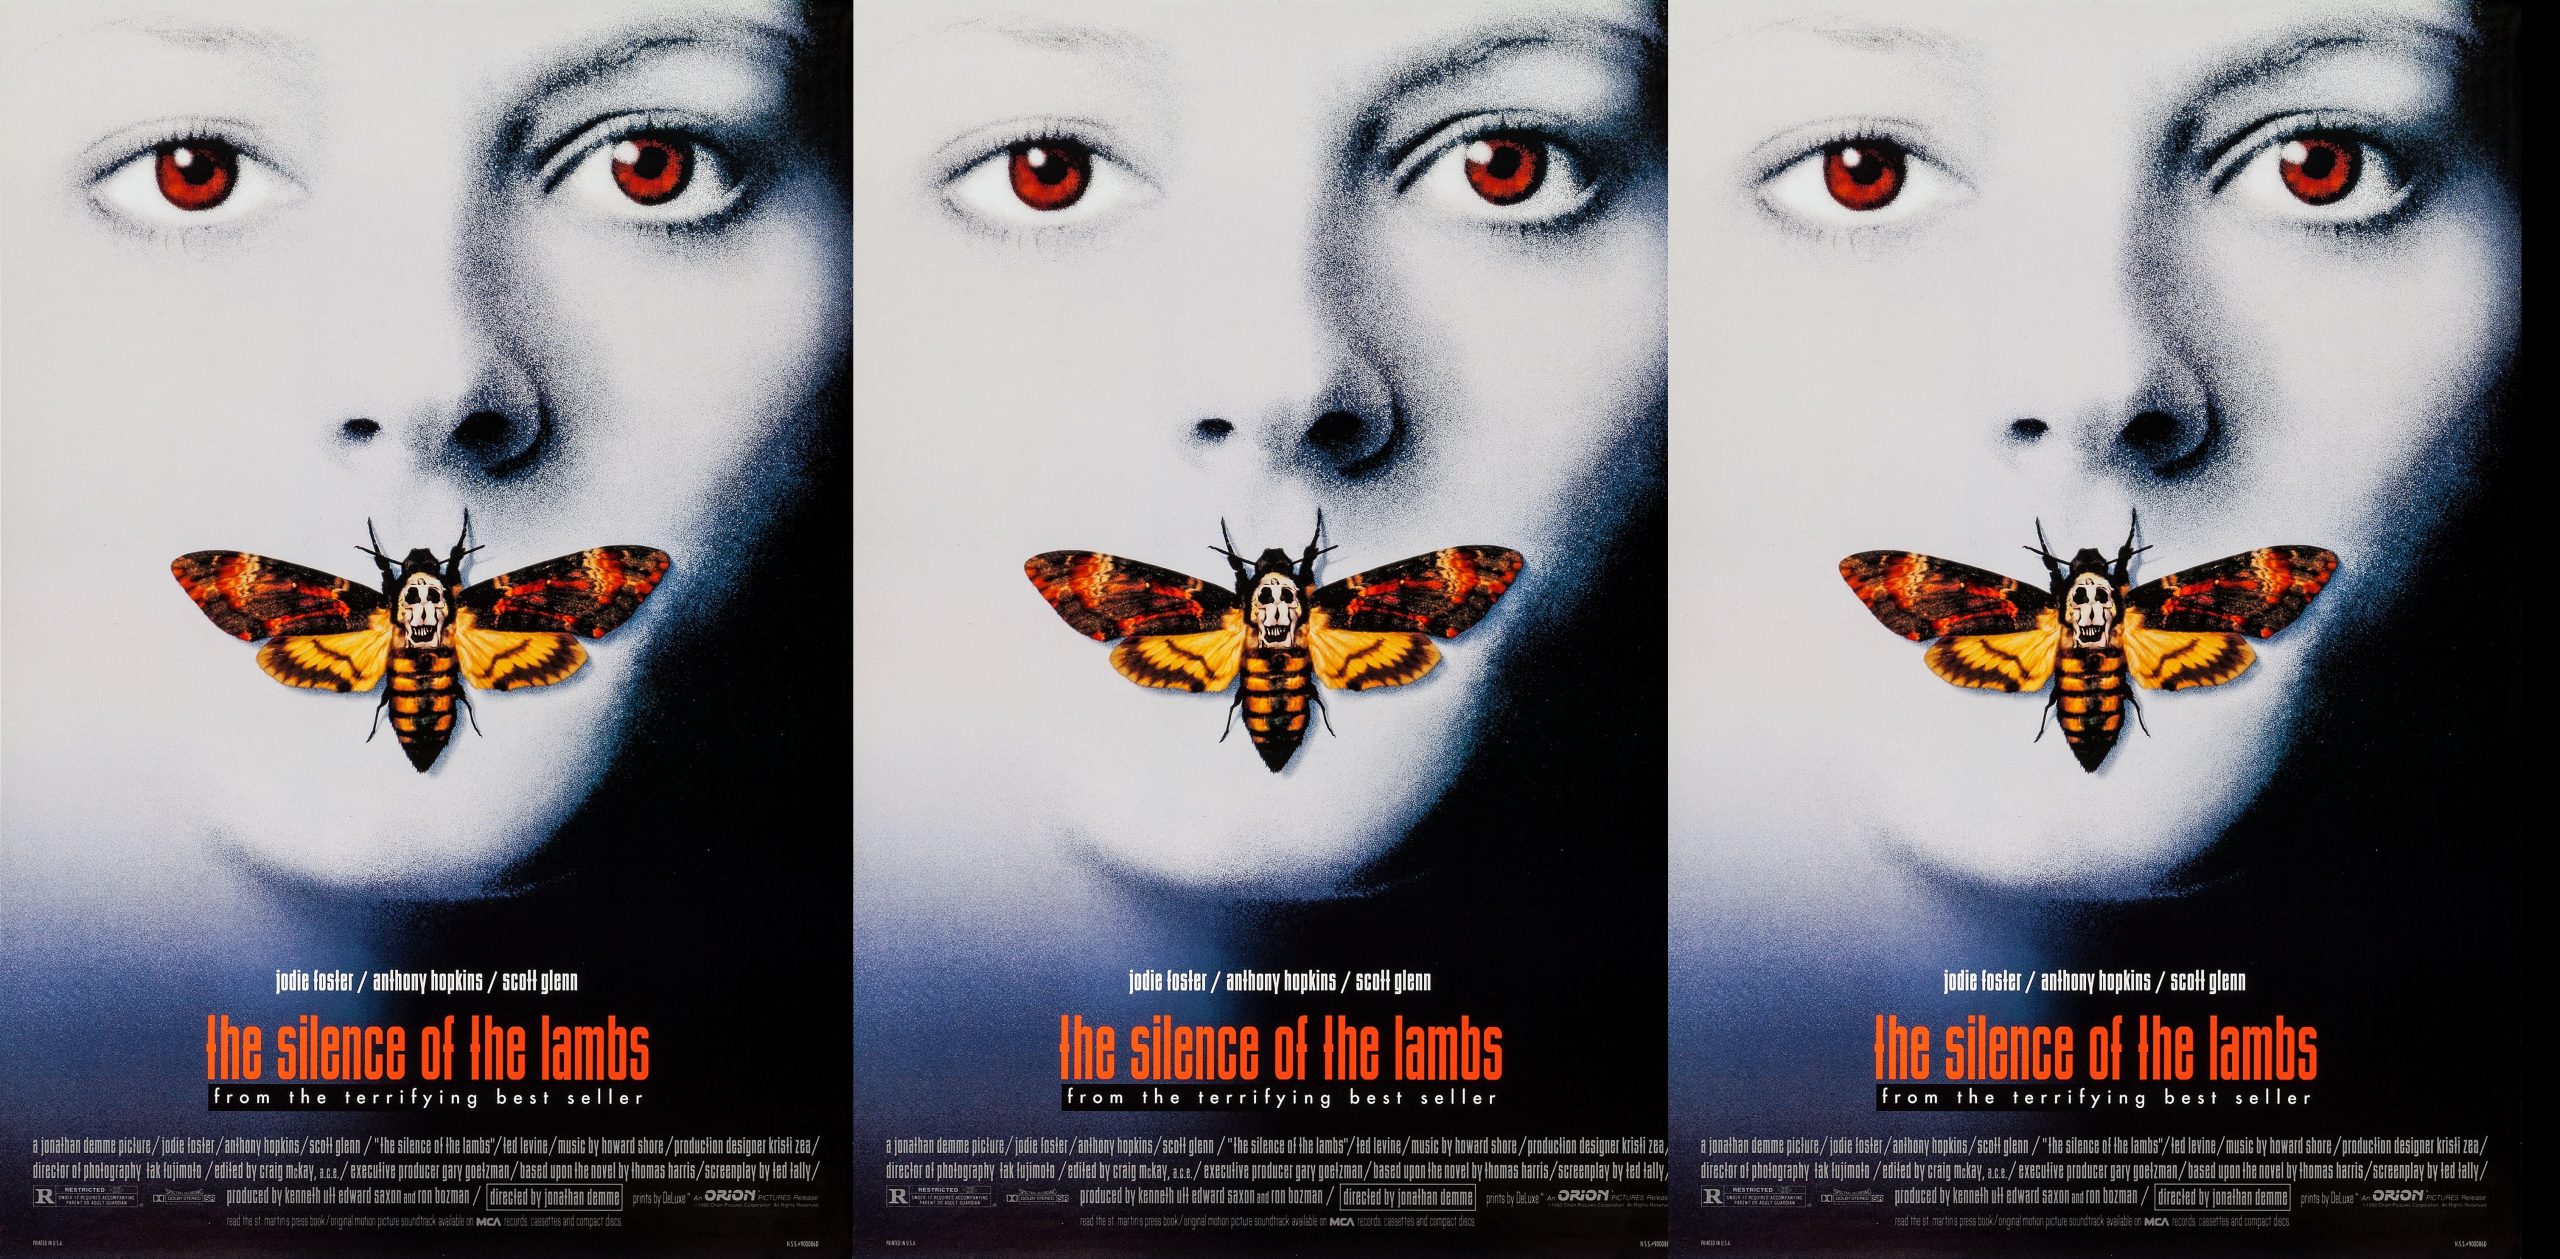 Silence of the Lambs, MGM+, Strong Heart/Demme Production, Orion Pictures